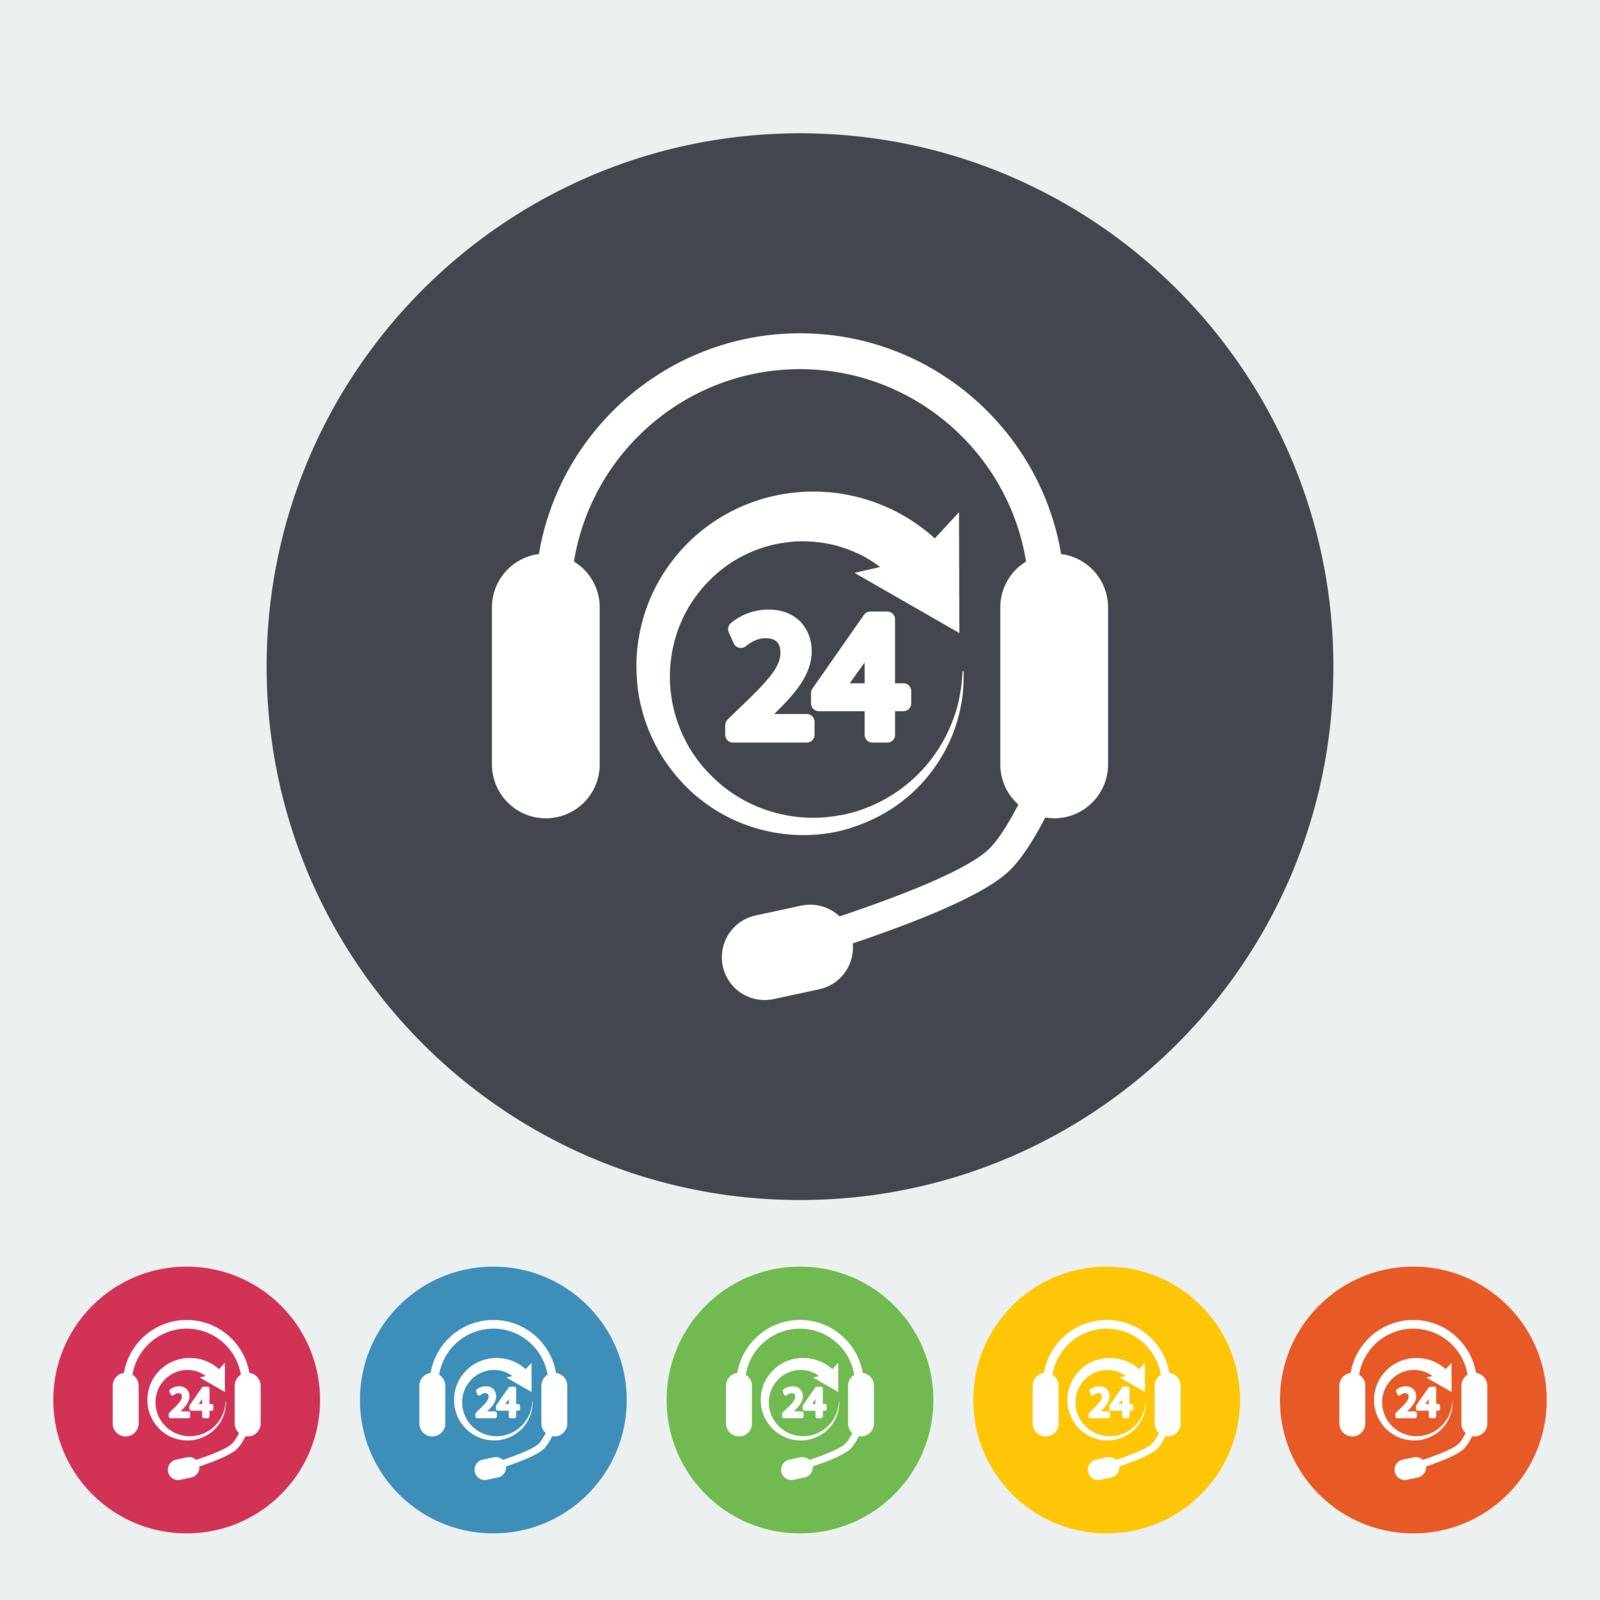 Support 24 hours. Single flat icon on the button. Vector illustration.